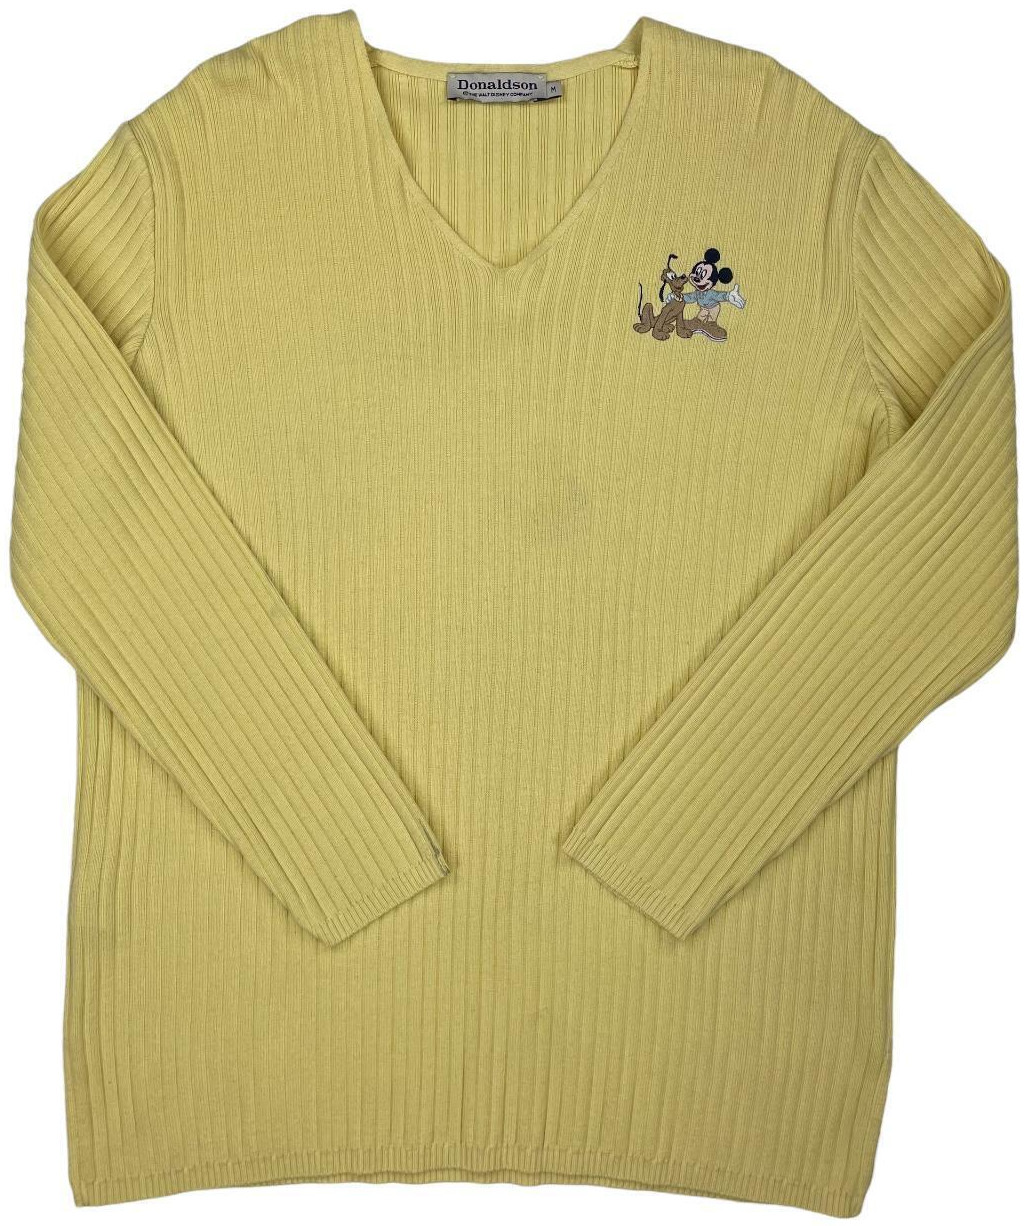 A yellow sweater with an embroidered Mickey and Pluto